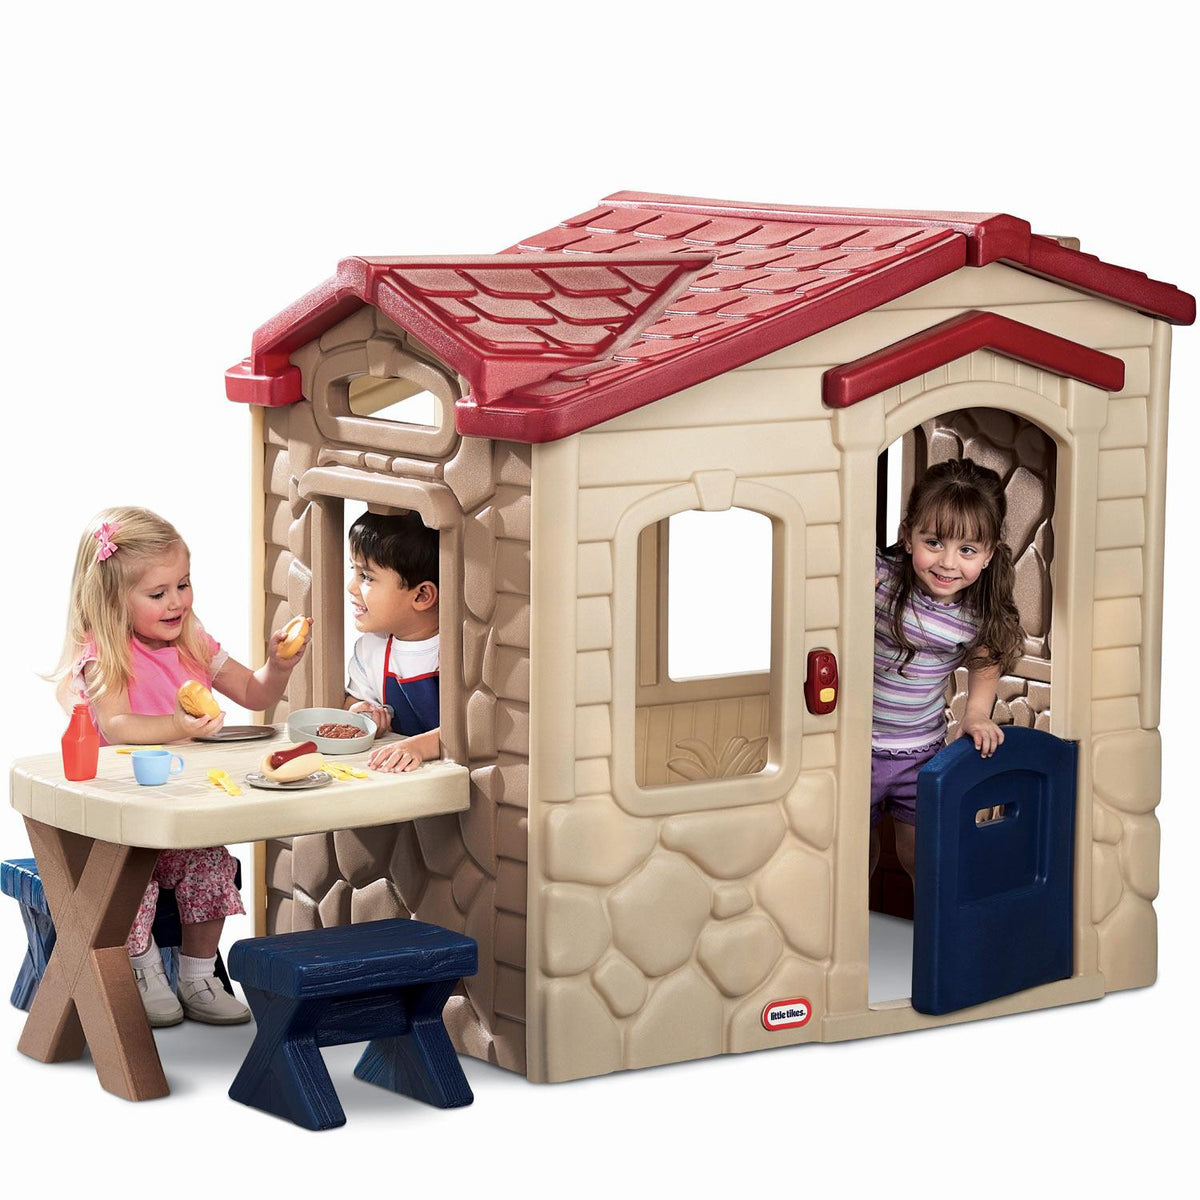 Picnic On The Patio™ Playhouse Little Tikes Replacement Parts